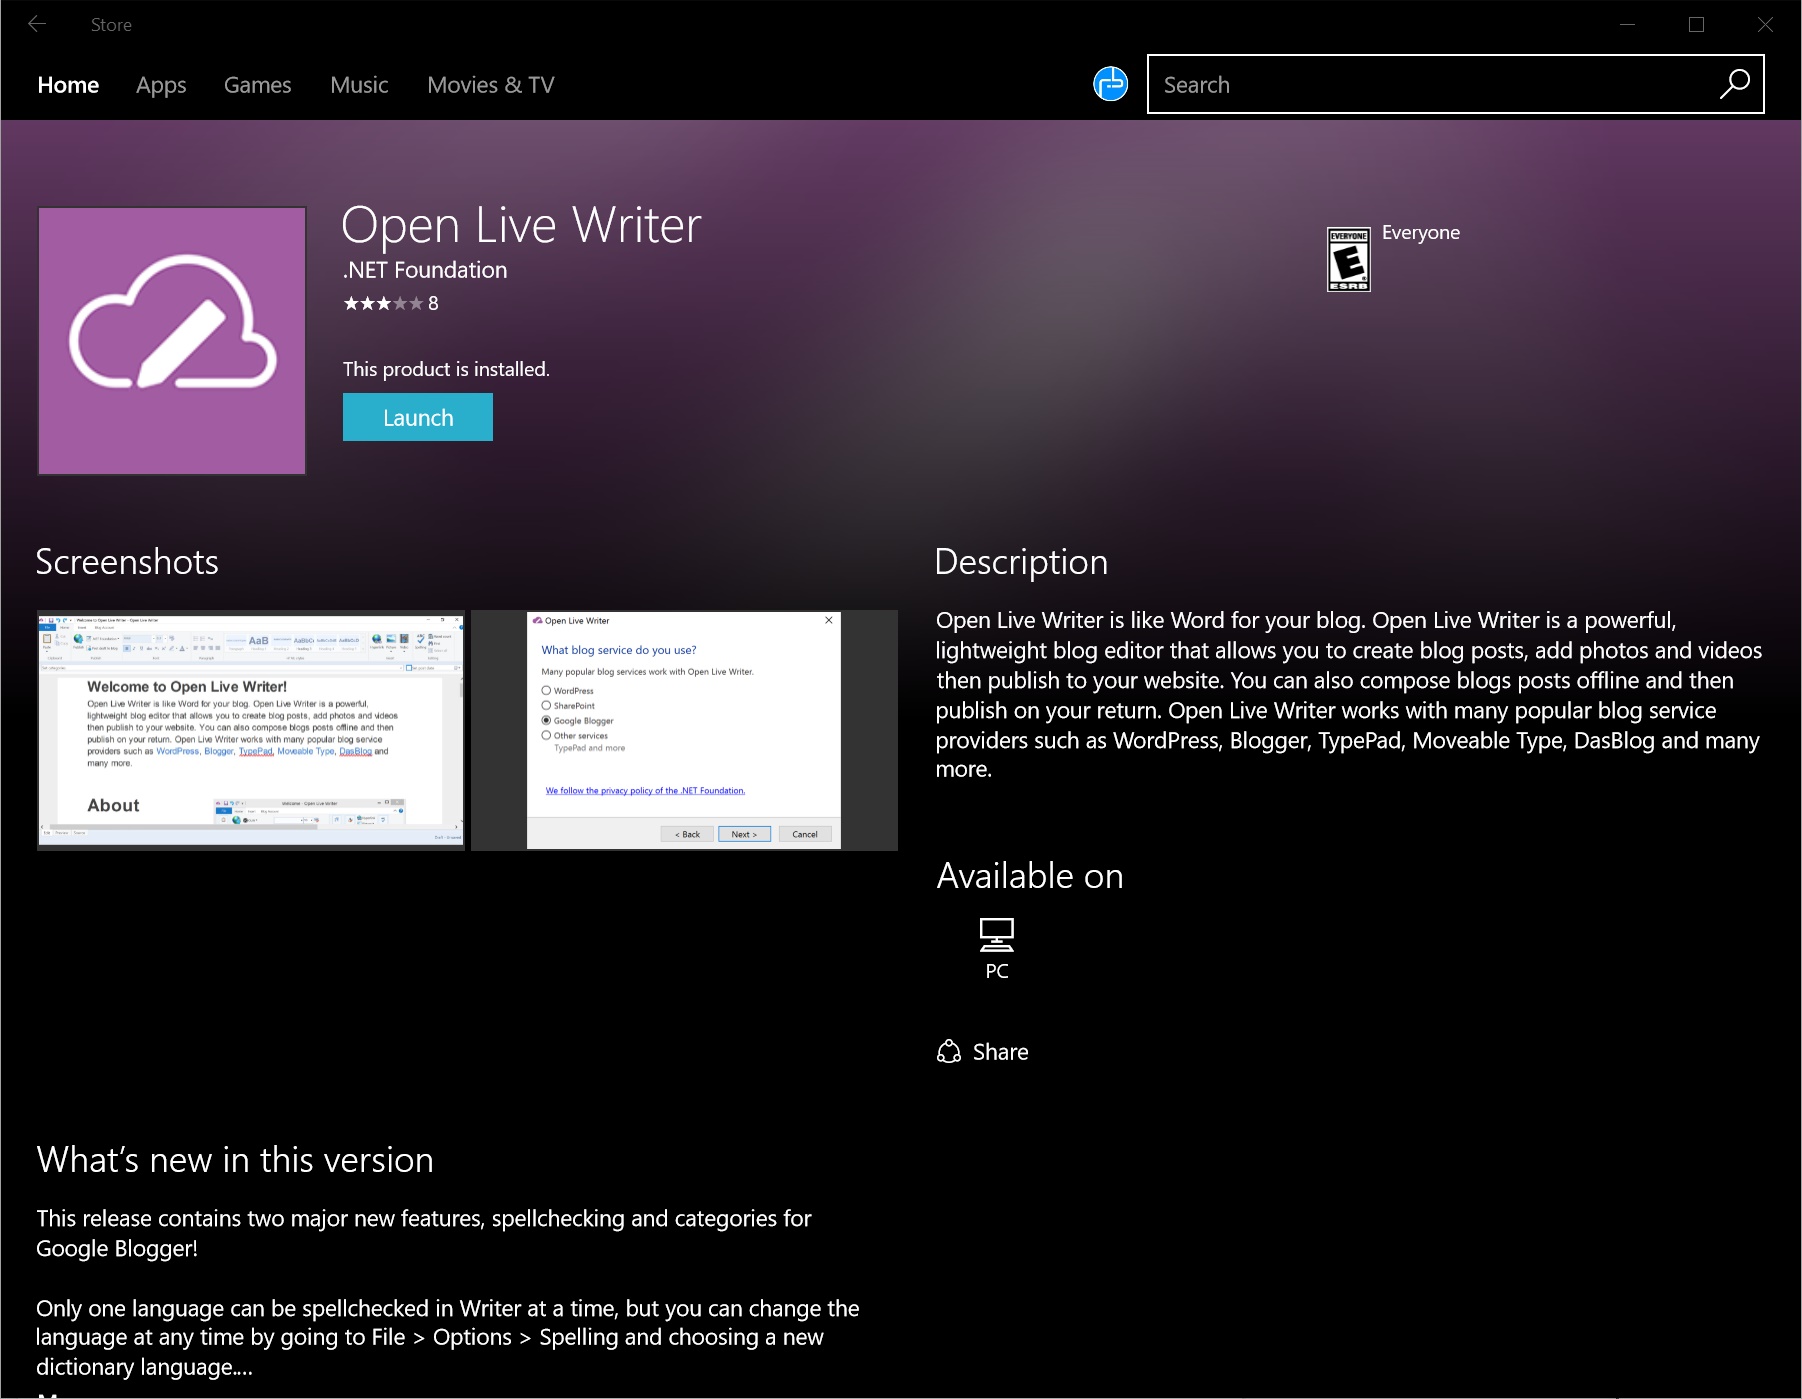 Widows Live Writer comes to Windows 10 devices